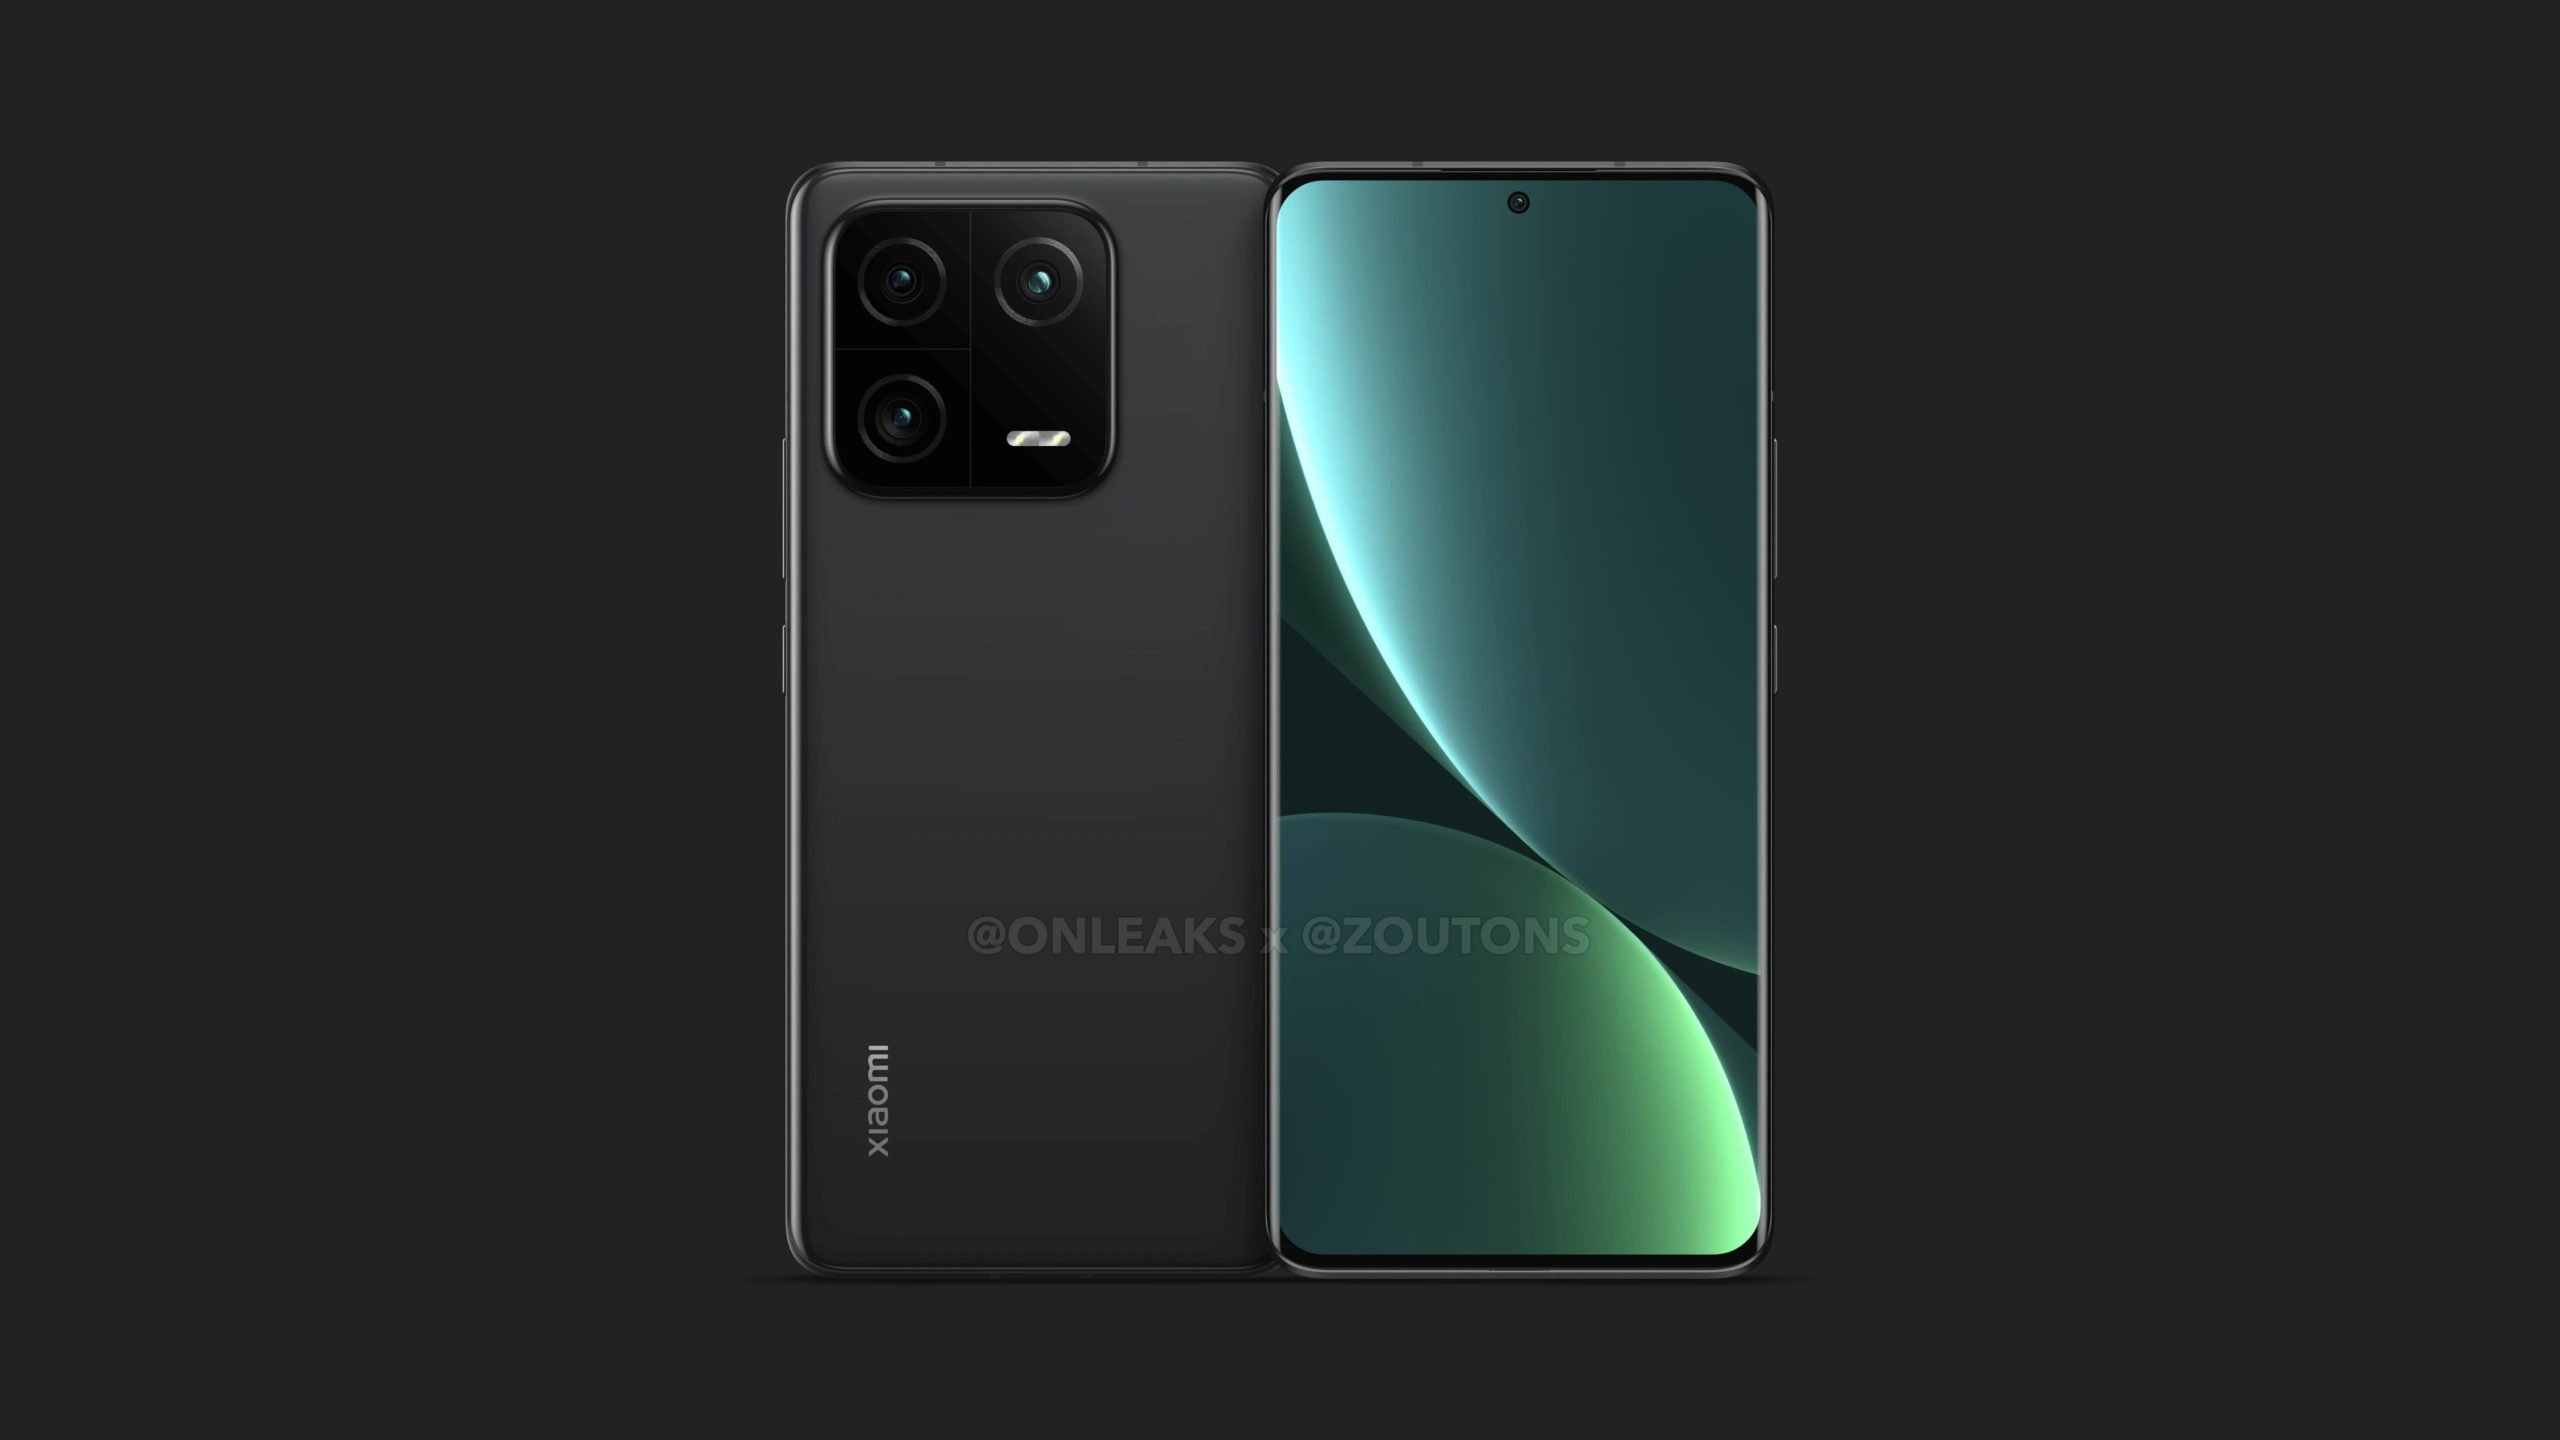 Xiaomi-13-Pro-Onleaks-Zoutons-2-scaled-1